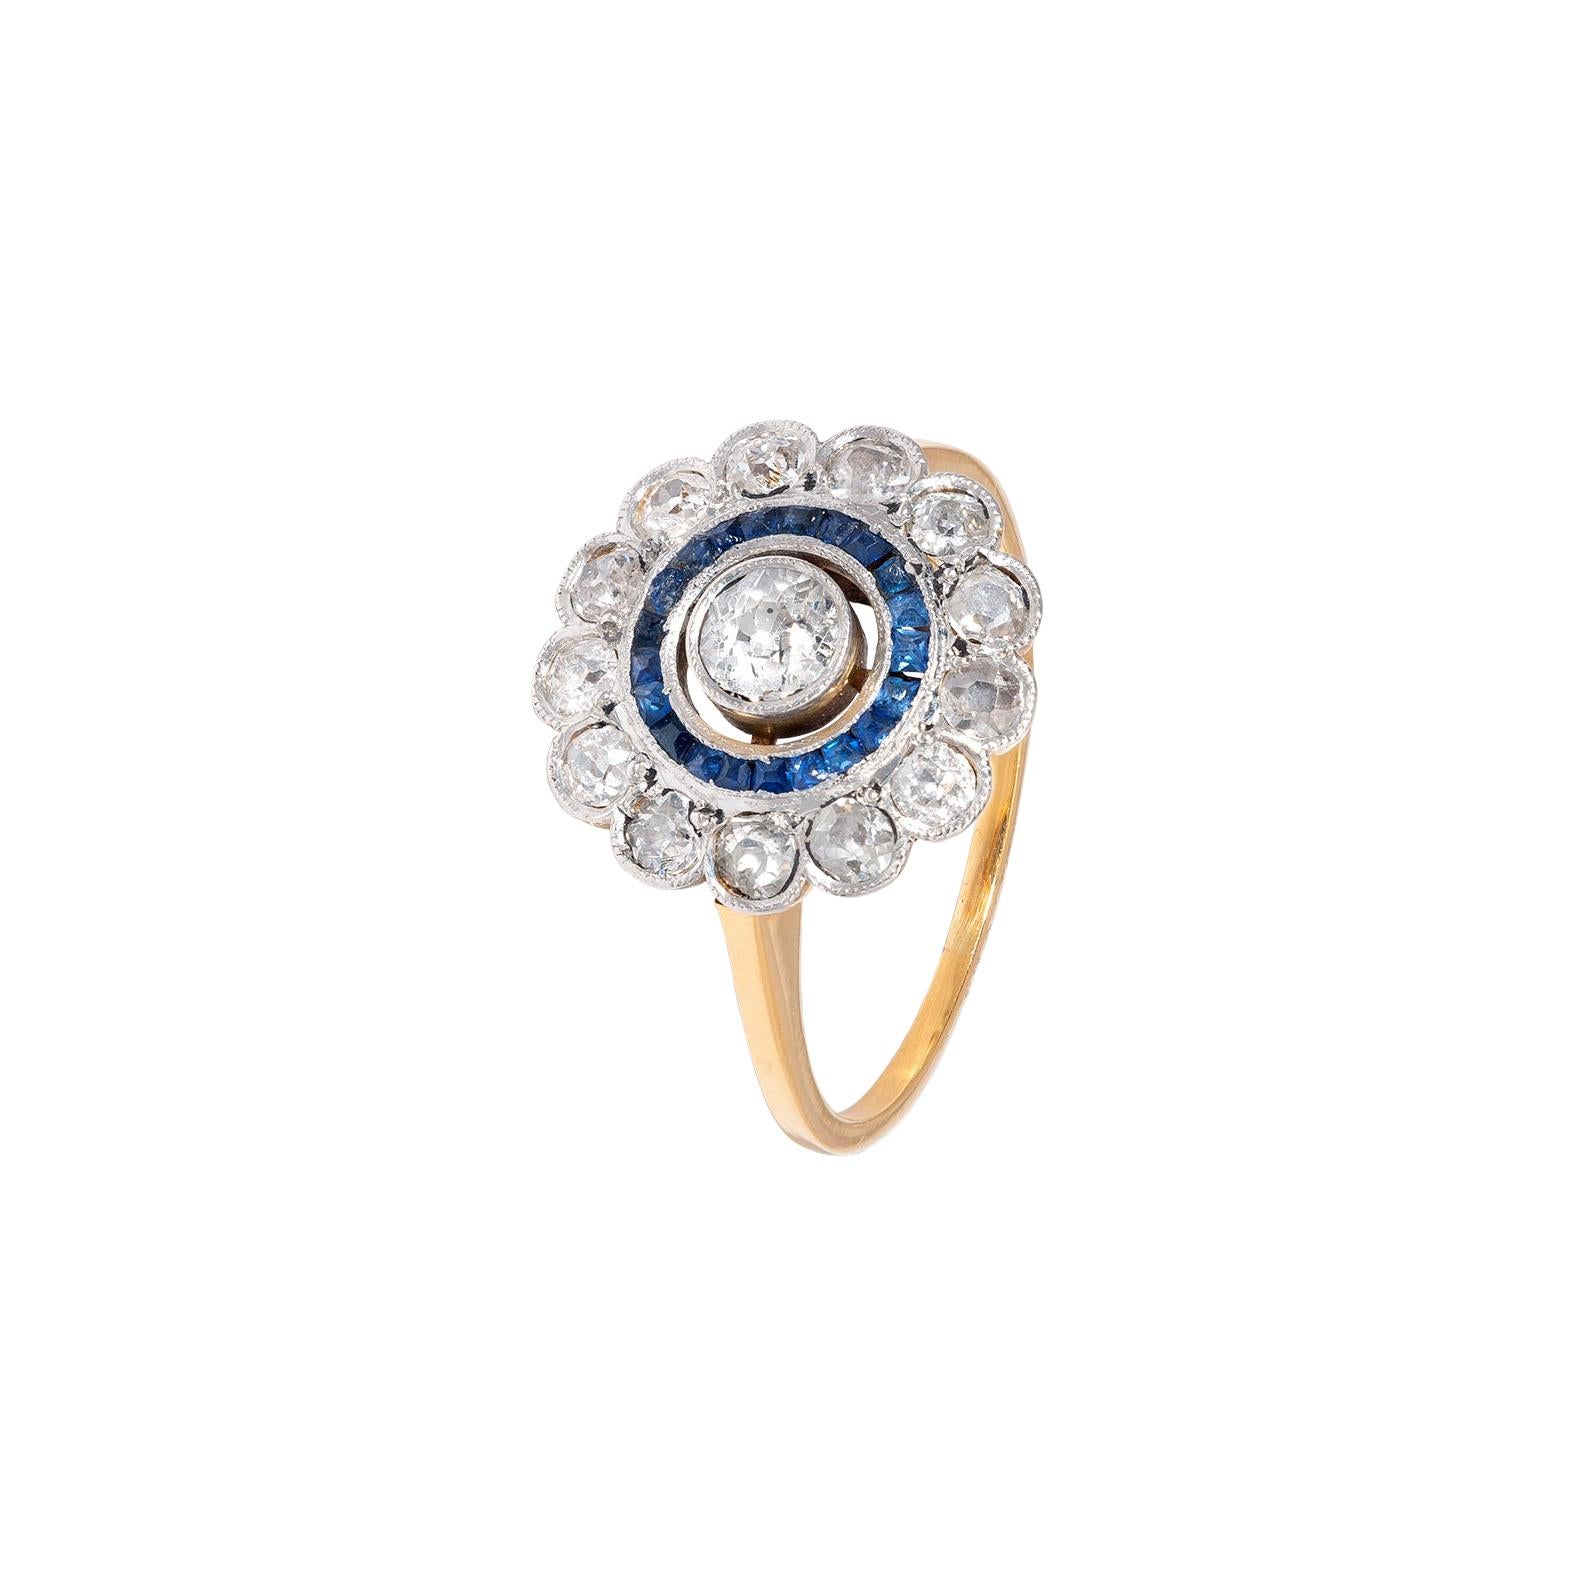 Old Cut Diamond and Sapphire ‘Target’ Ring